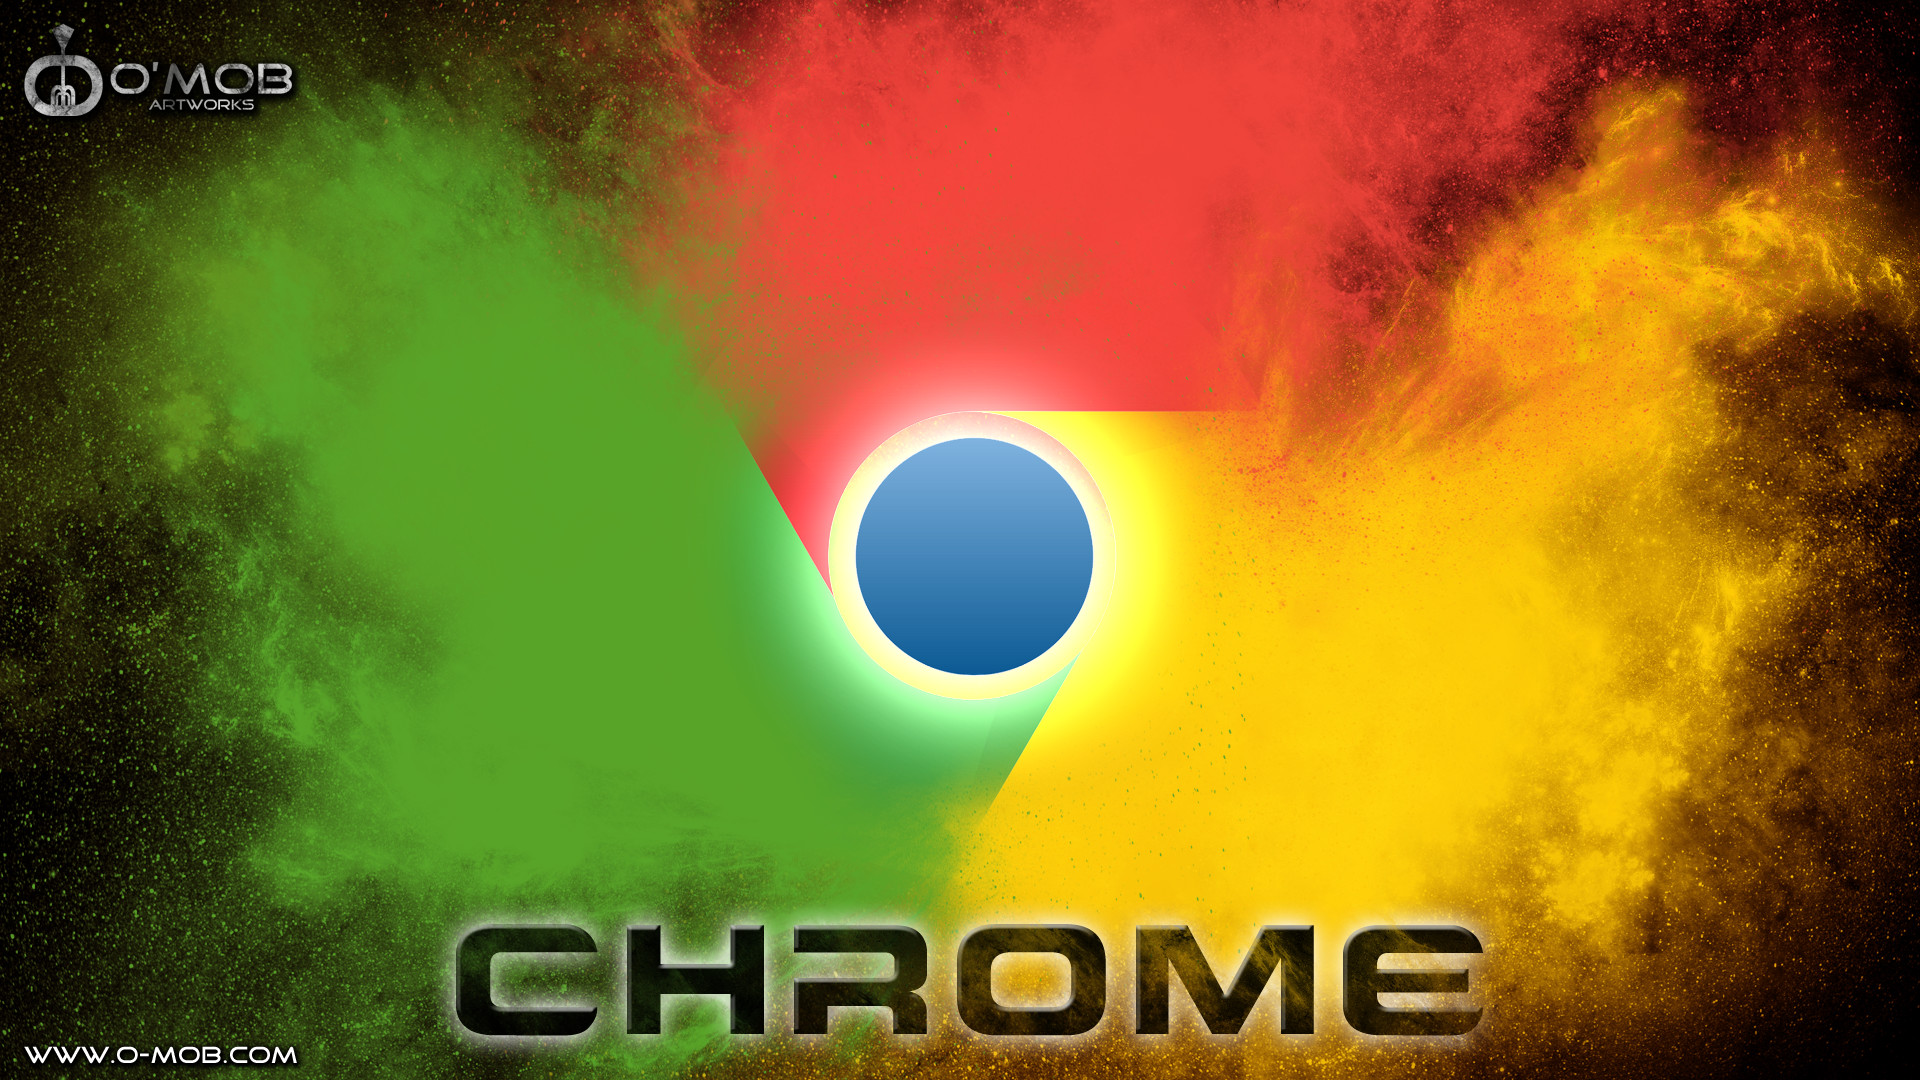 1920x1080 Google Chrome Wallpapers, Google Chrome Wallpapers in Full HD | ,  by Edwardo Troop